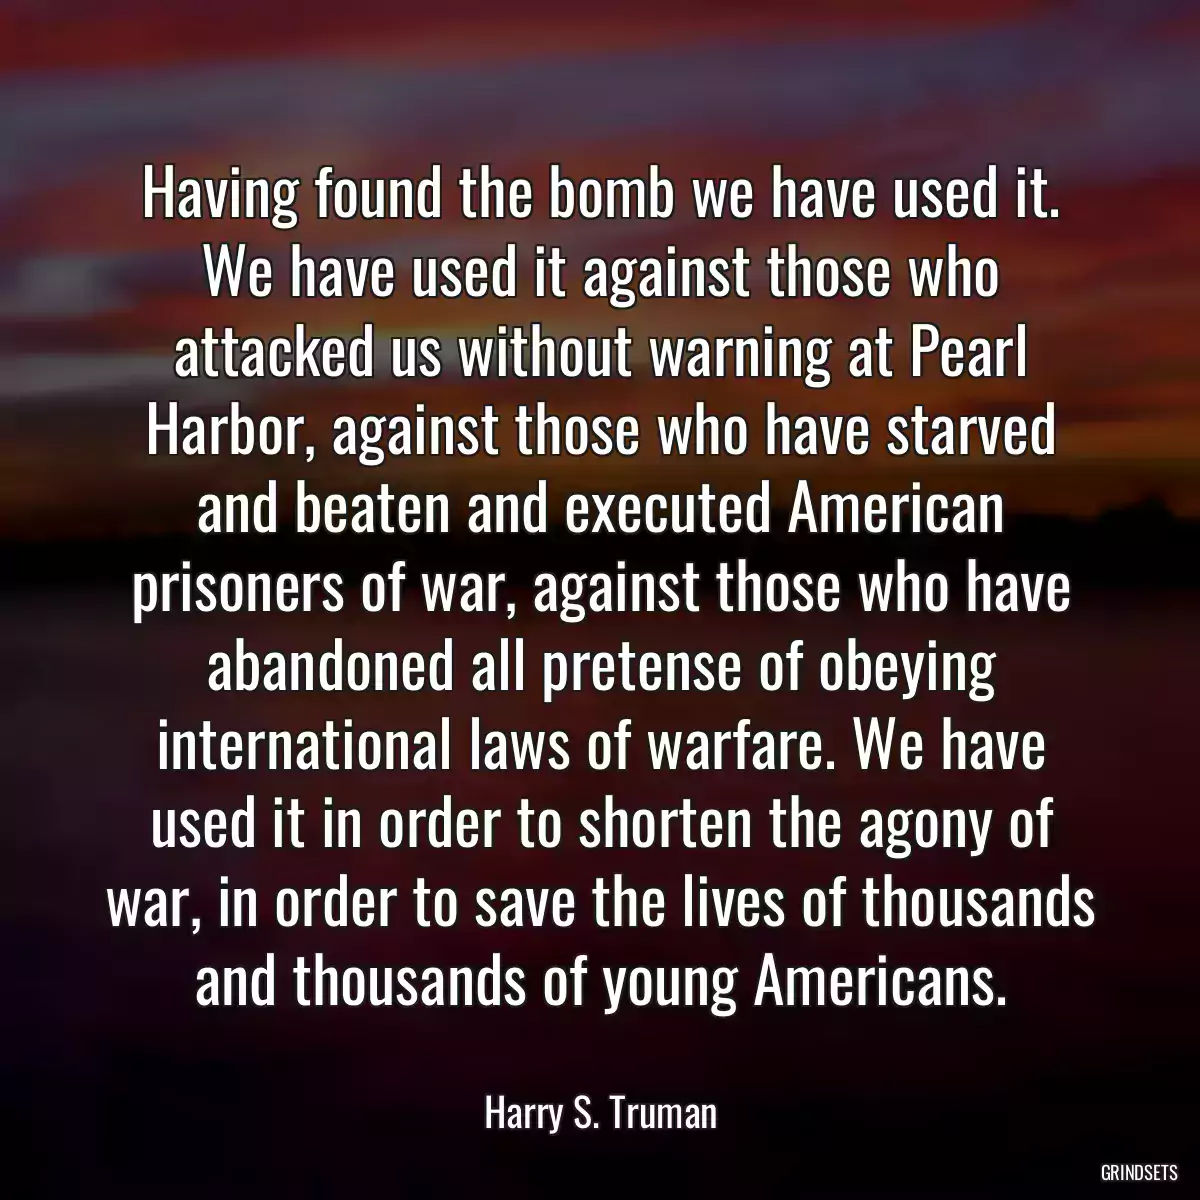 Having found the bomb we have used it. We have used it against those who attacked us without warning at Pearl Harbor, against those who have starved and beaten and executed American prisoners of war, against those who have abandoned all pretense of obeying international laws of warfare. We have used it in order to shorten the agony of war, in order to save the lives of thousands and thousands of young Americans.